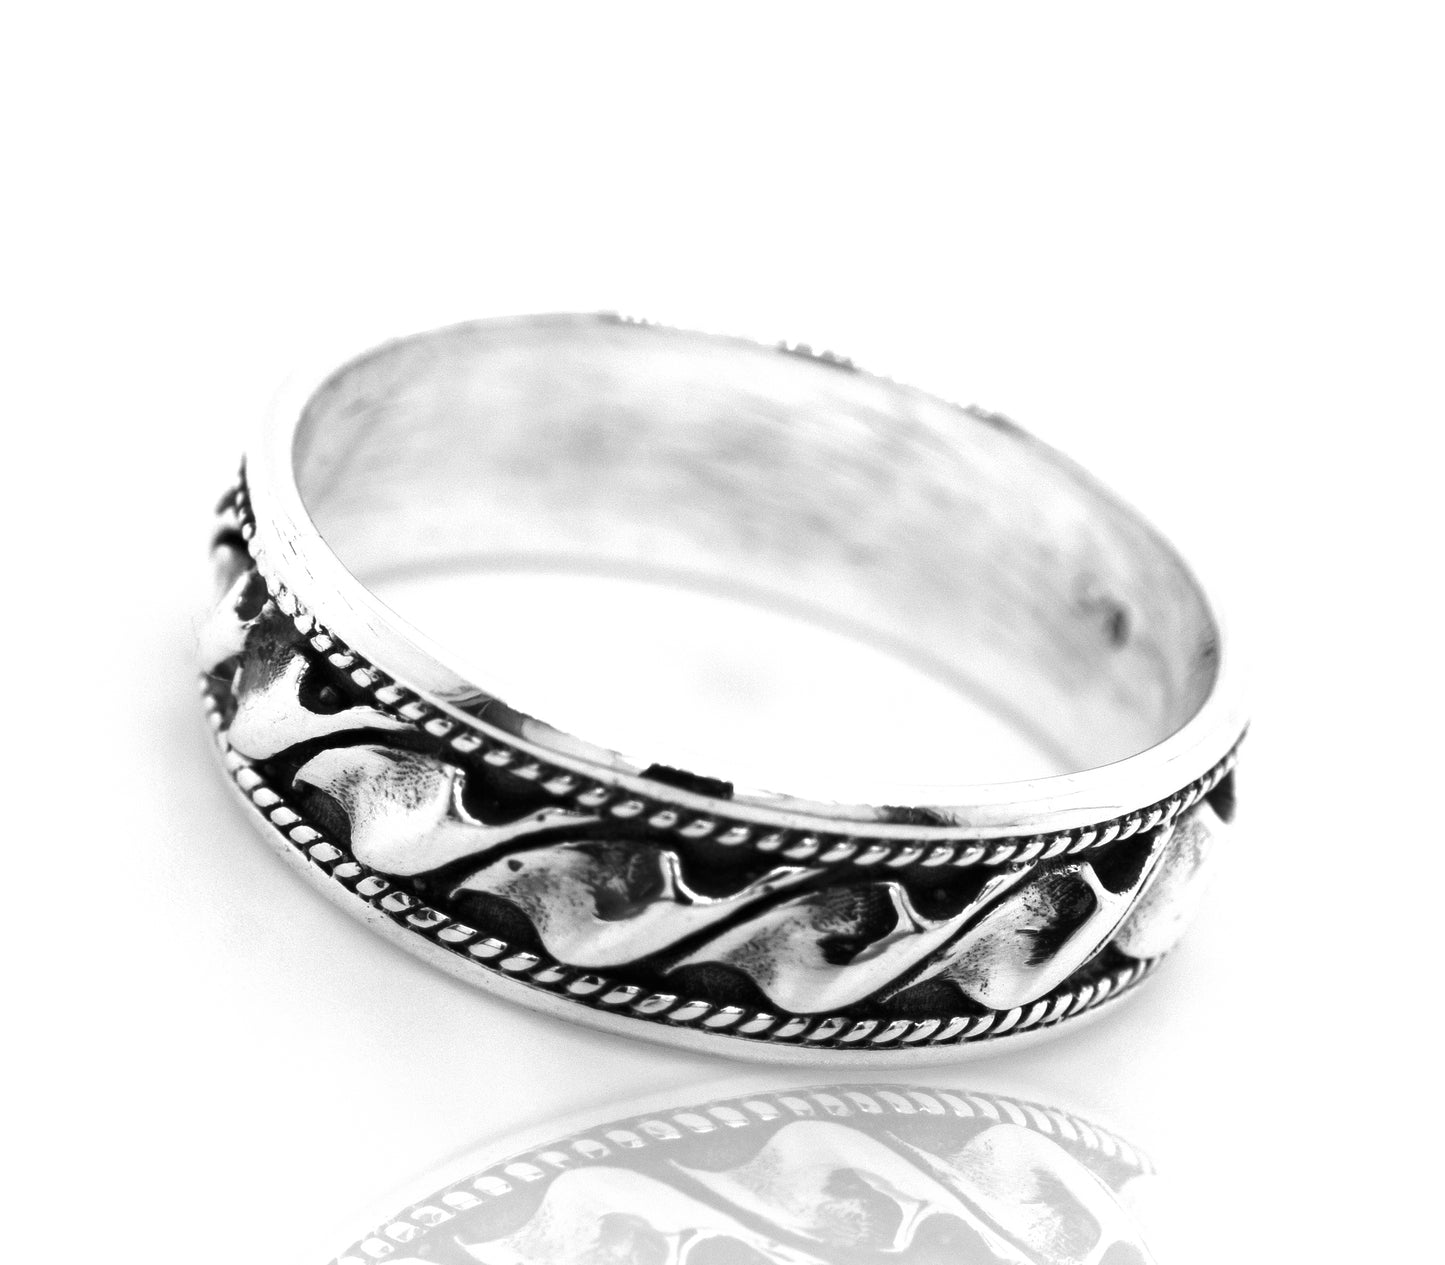 A captivating wavy rope band with a Celtic knot design.